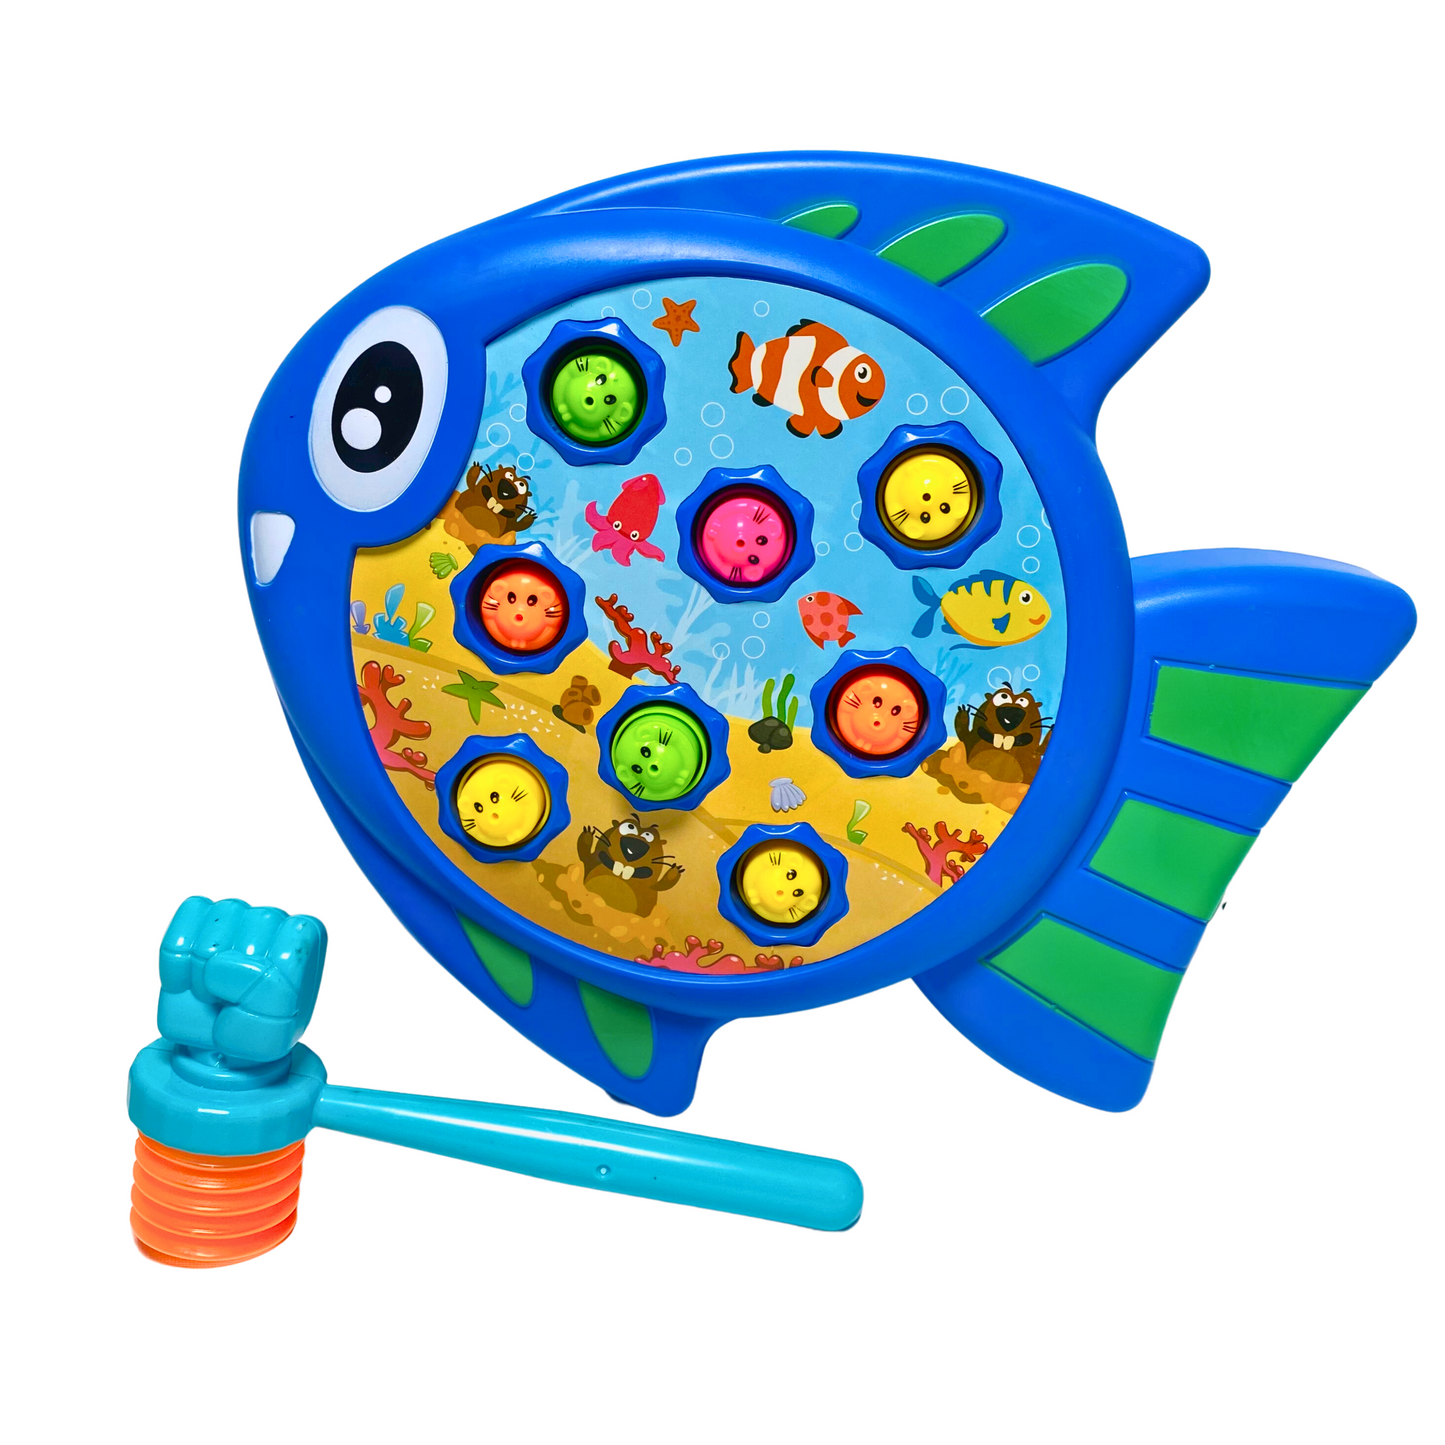 Whack-A-Mole Hammer Toys for Fun Learning